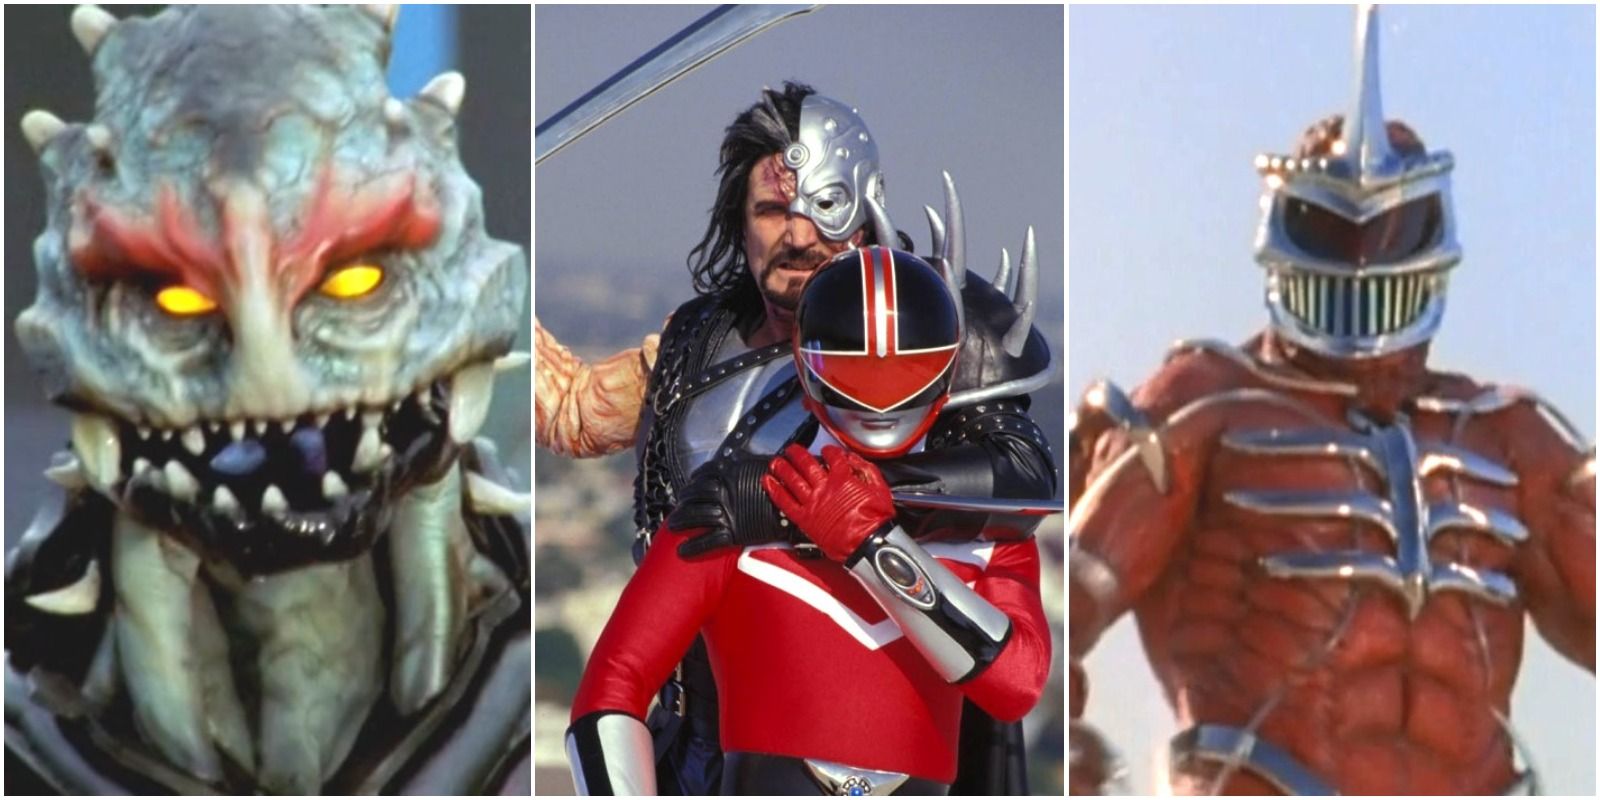 Ransik fighting the Red Ranger, Mesogog, and Lord Zedd from the Power Rangers Franchise